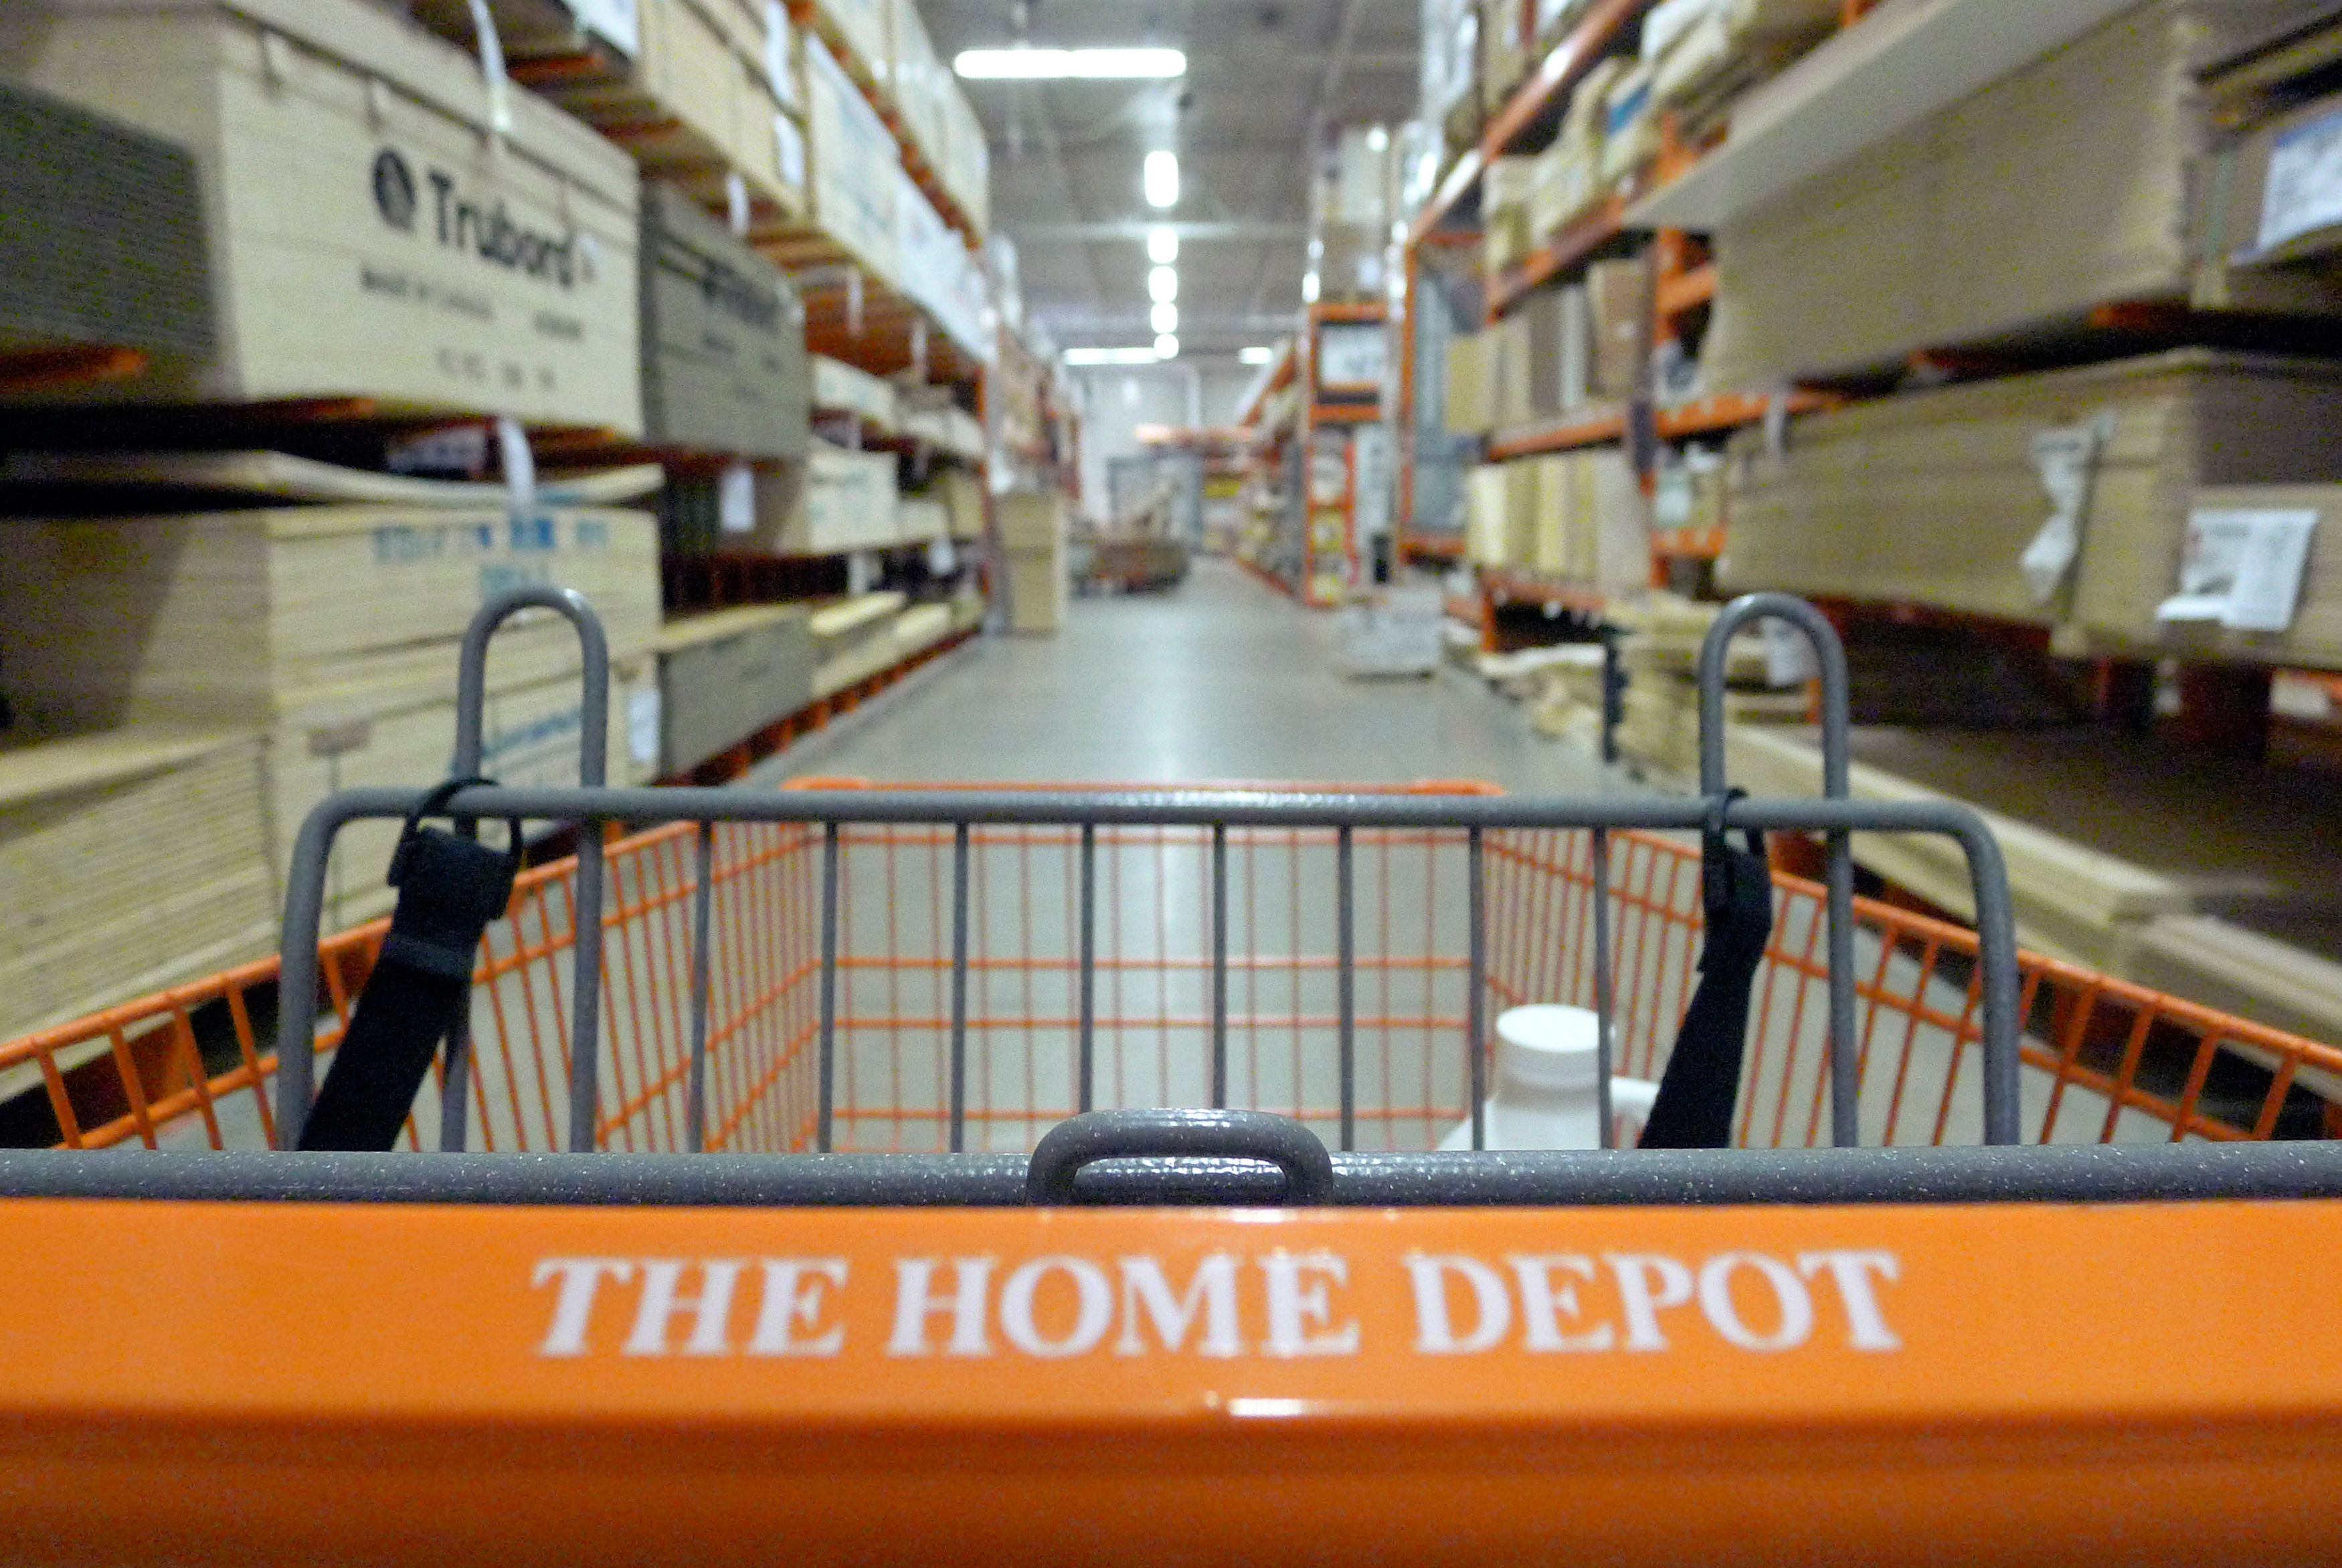 A shopping cart is seen in a Home Depot location in Niles, Illinois, May 19, 2014.